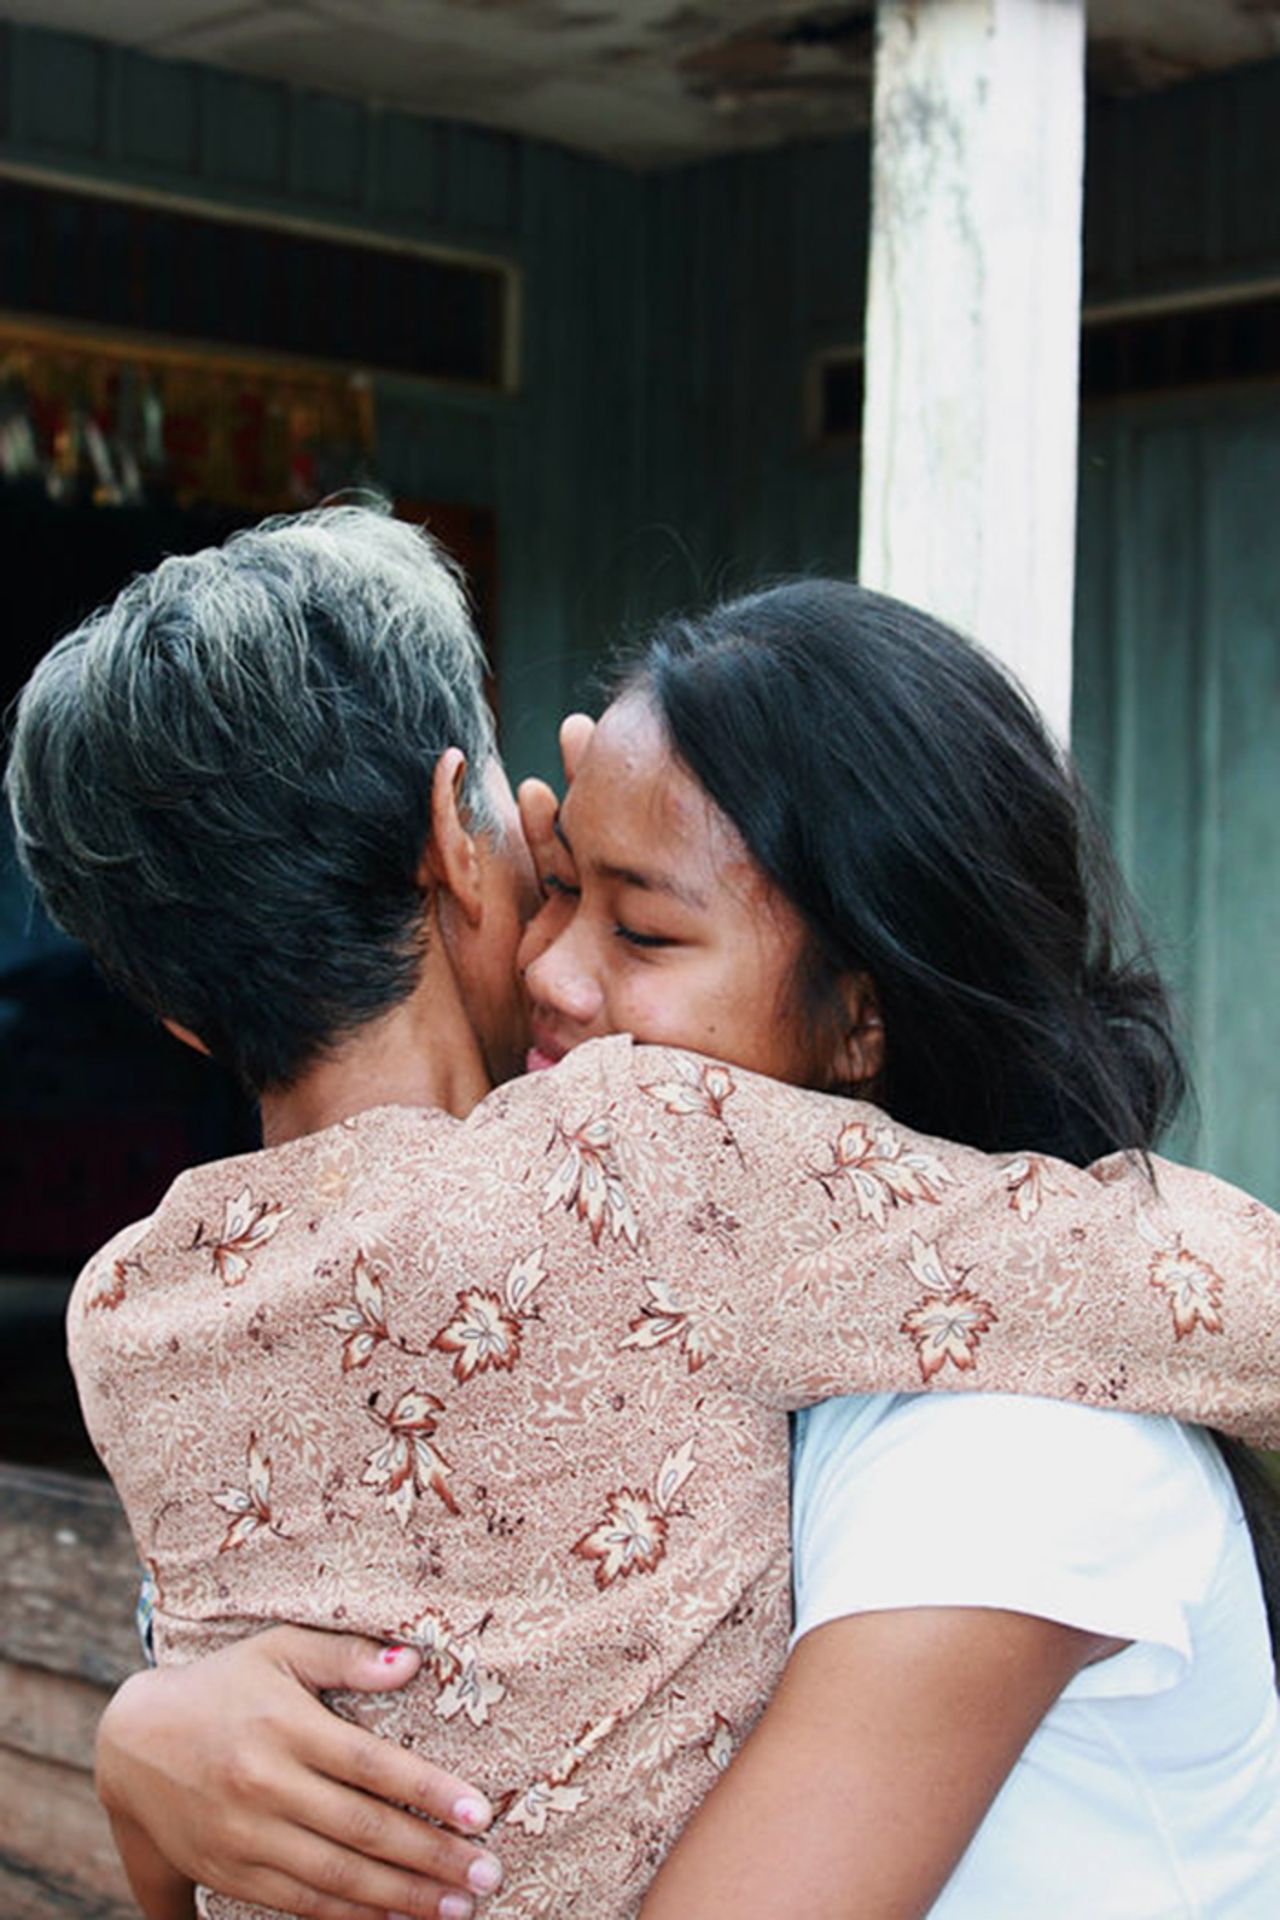 "Hugging my grandmother for the first time since I was six."